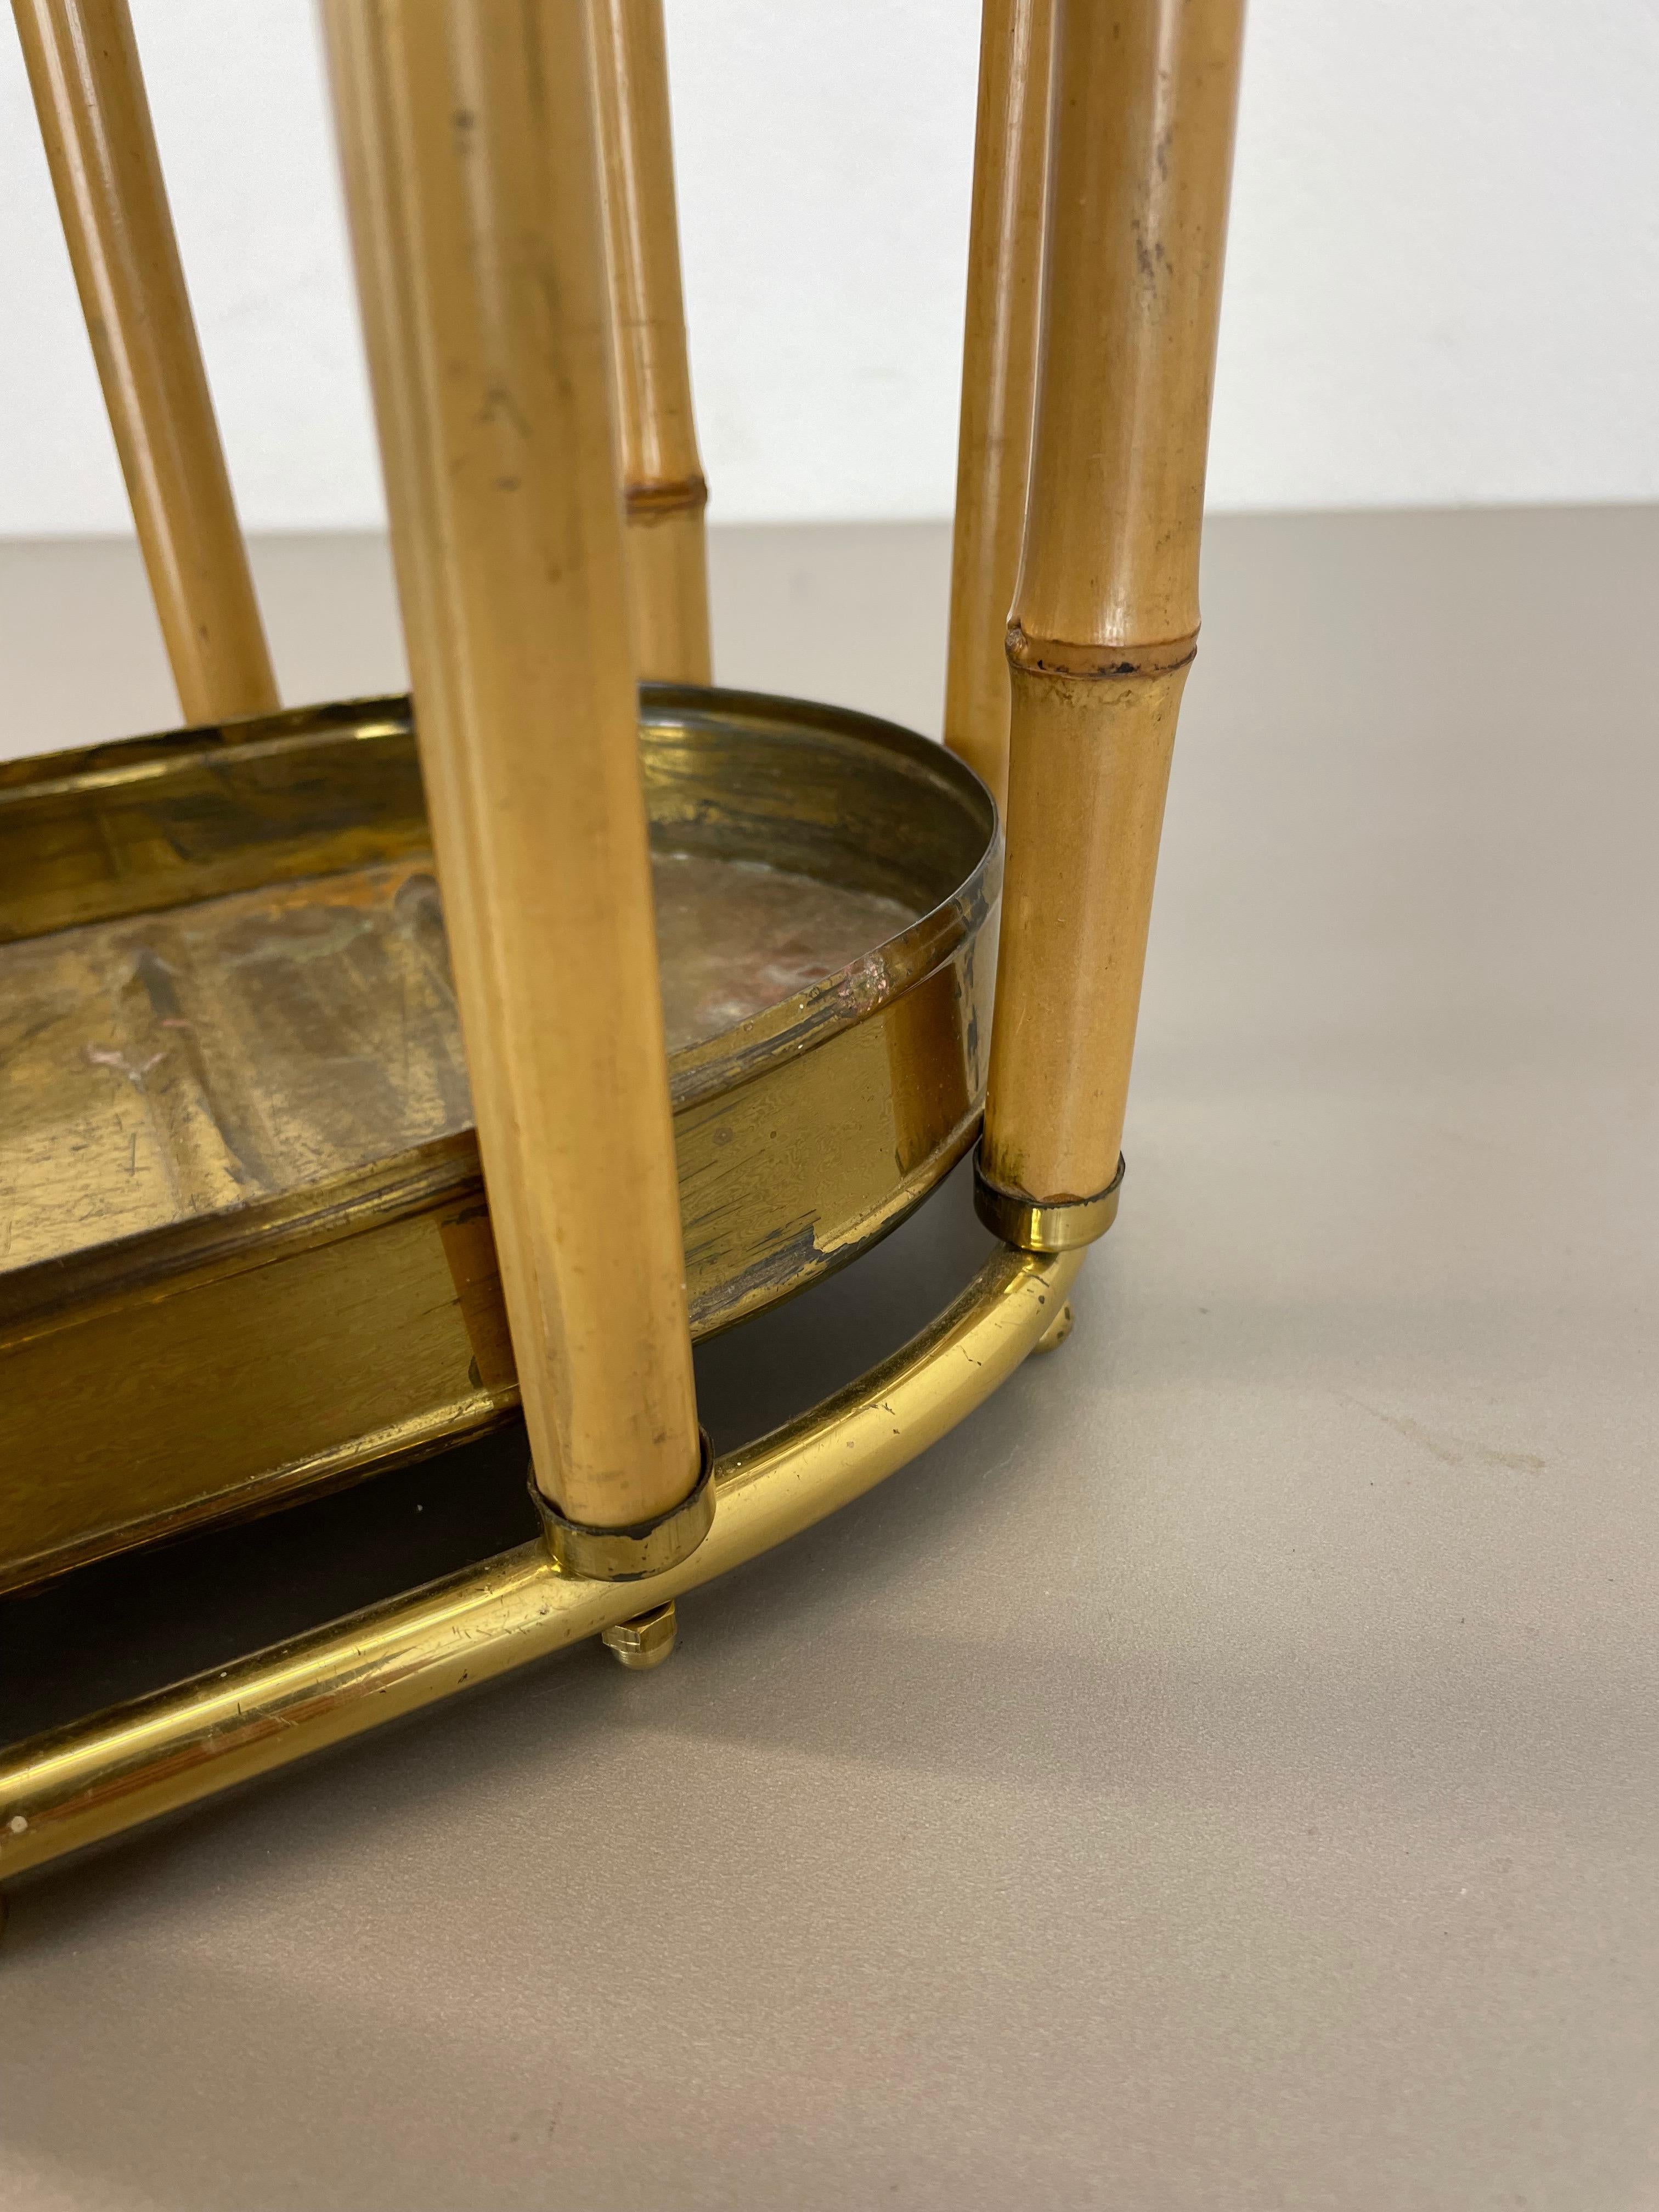 Hollywood Regency Auböck Style Brass Bamboo Umbrella Stand, Austria, 1950s For Sale 1